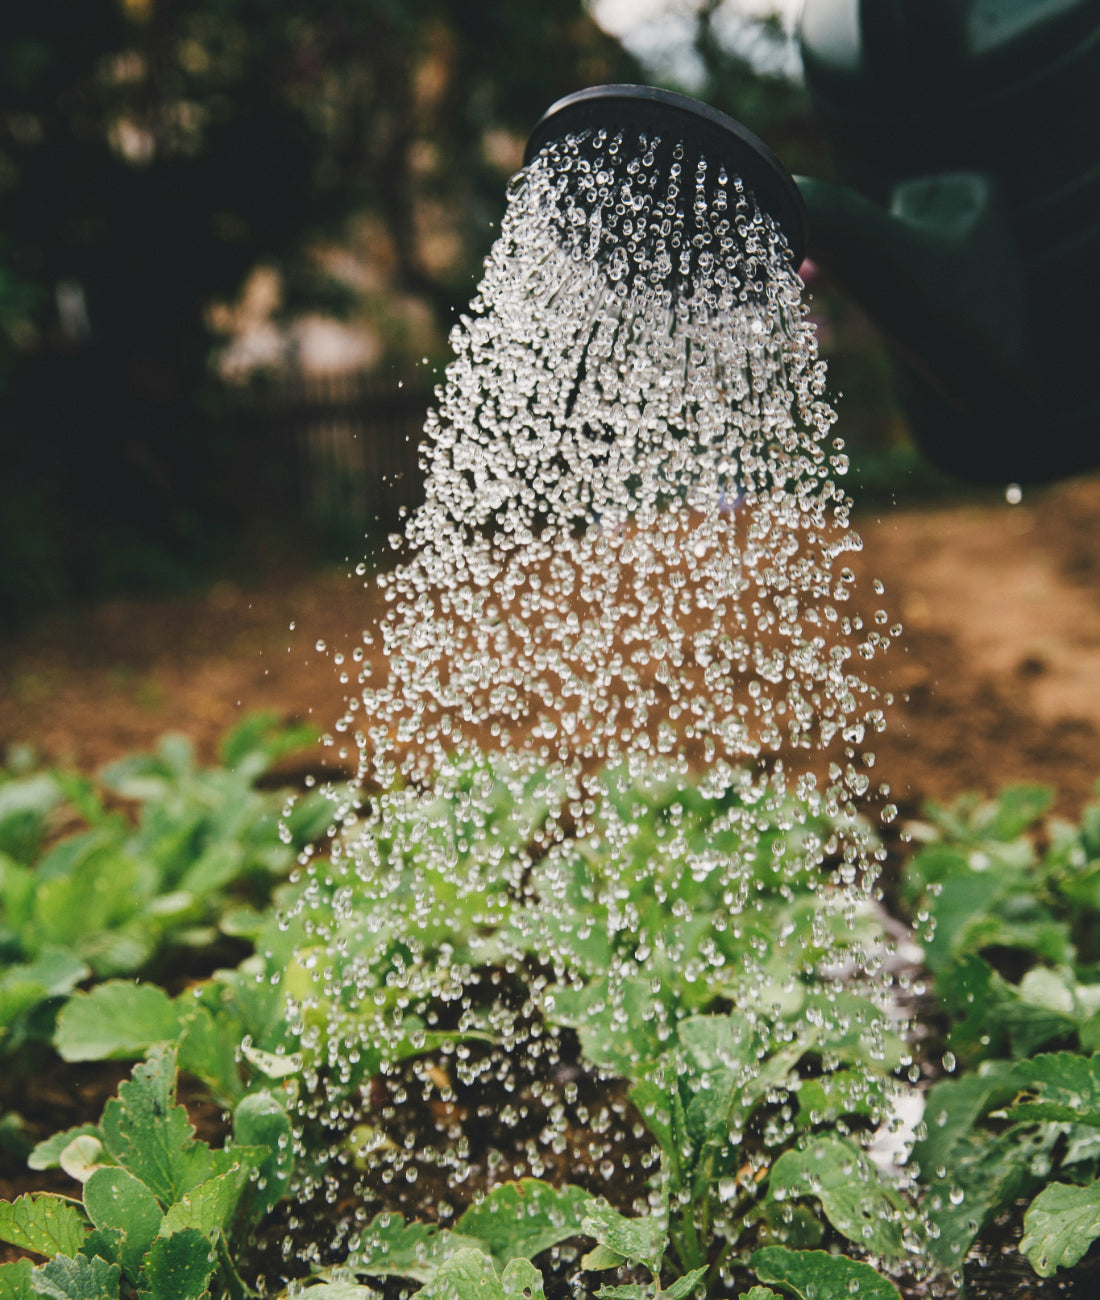 Choosing the Right Irrigation System for Your Garden: Drip vs. Olla Irrigation